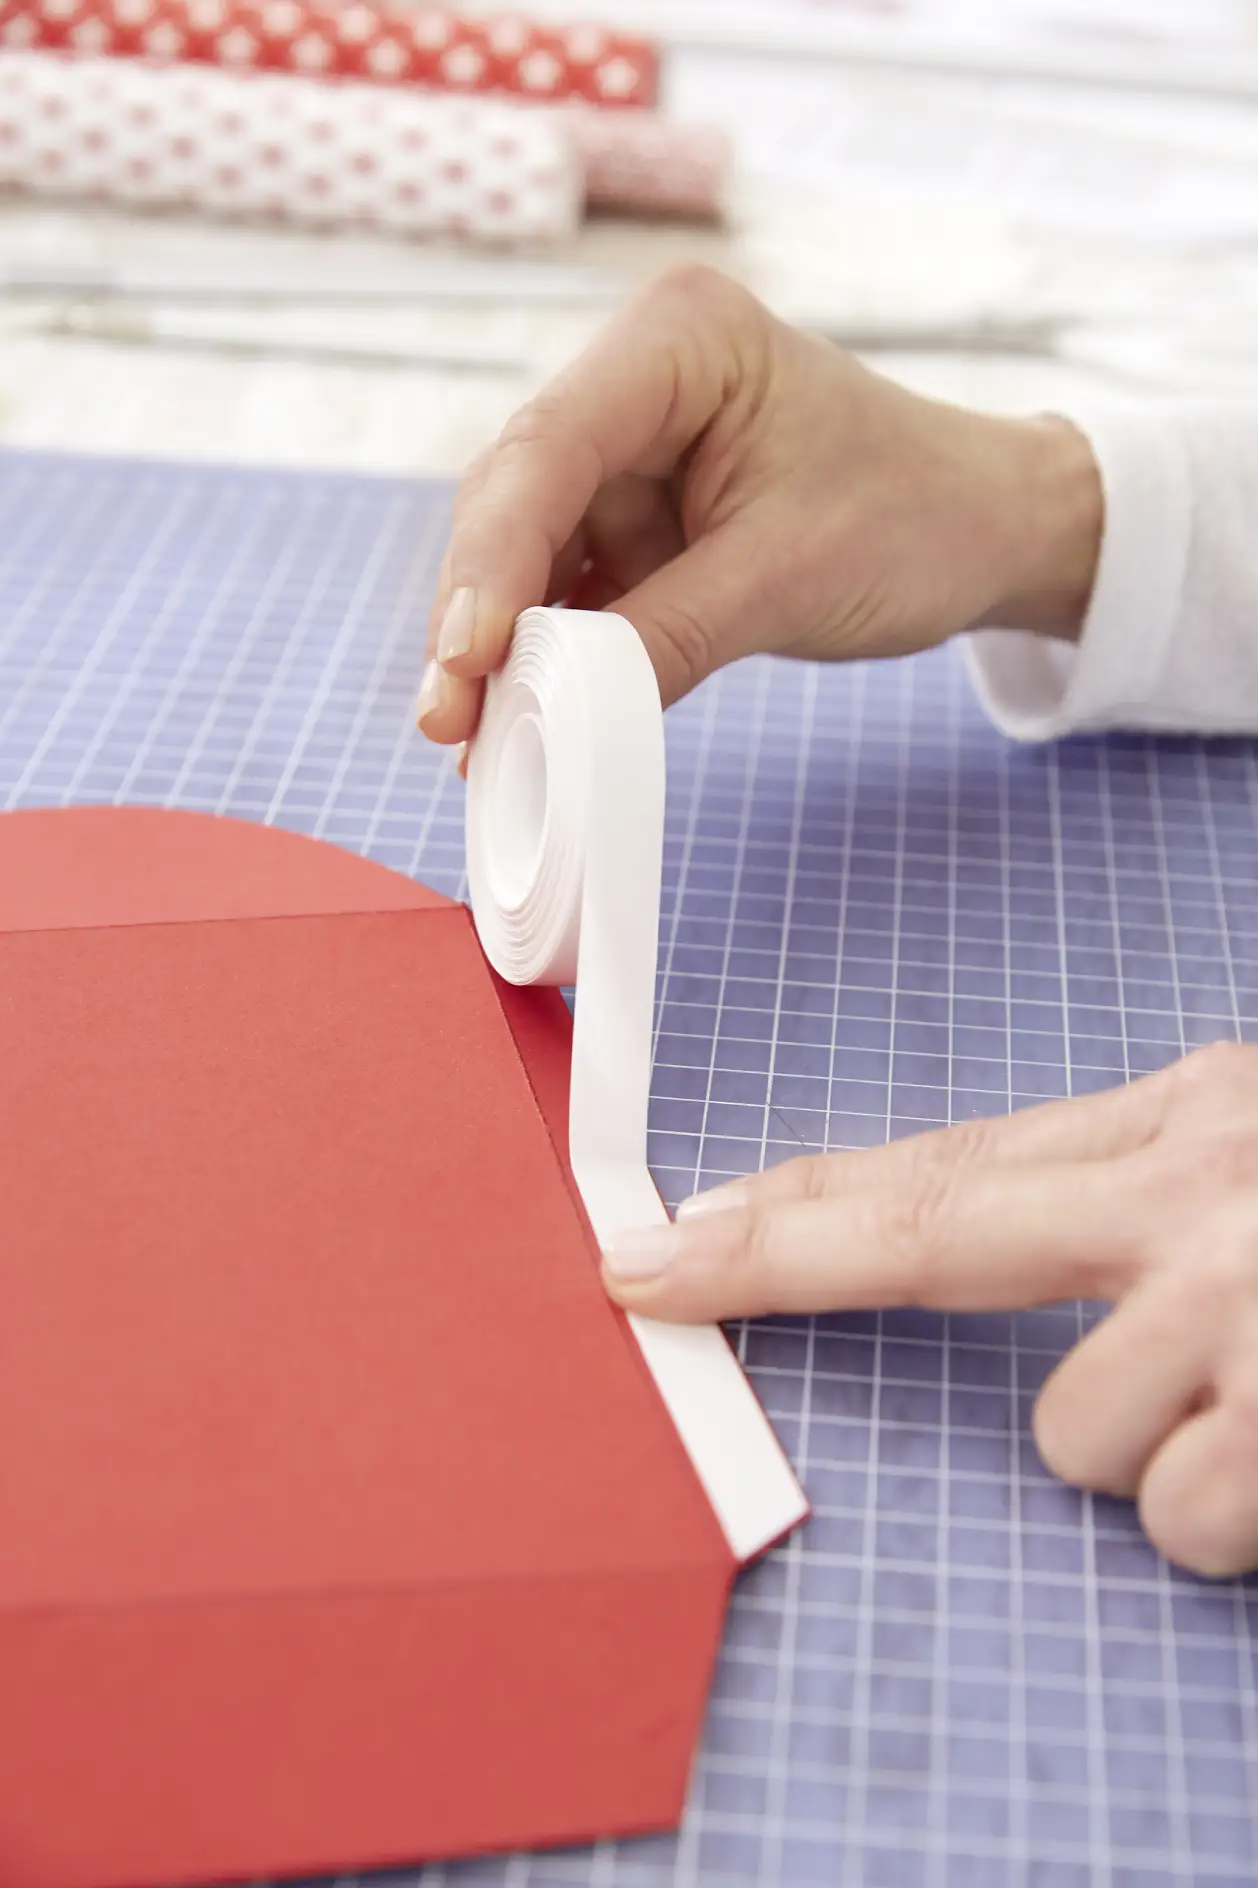 Apply a strip of double-sided adhesive tape